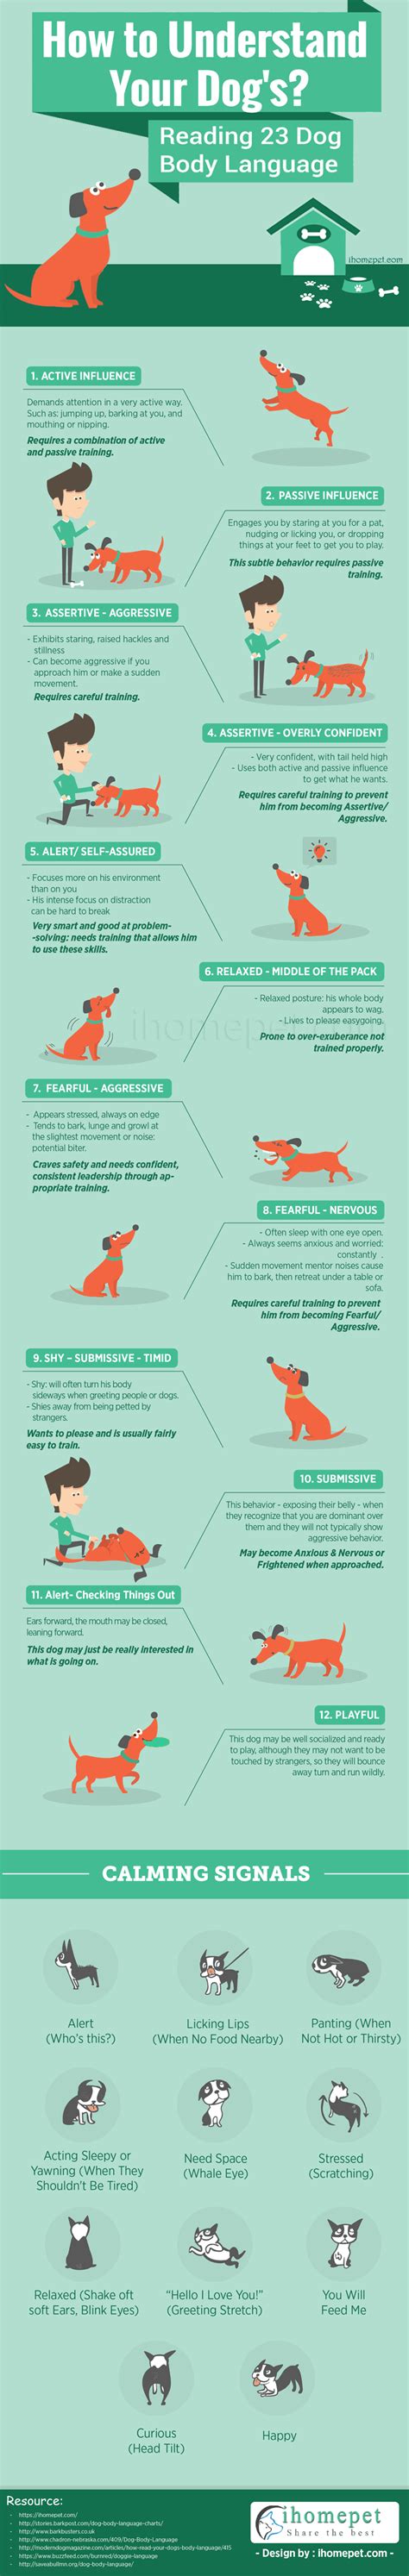 Understand Your Dog Read 23 Dog Body Language Cues Infographic